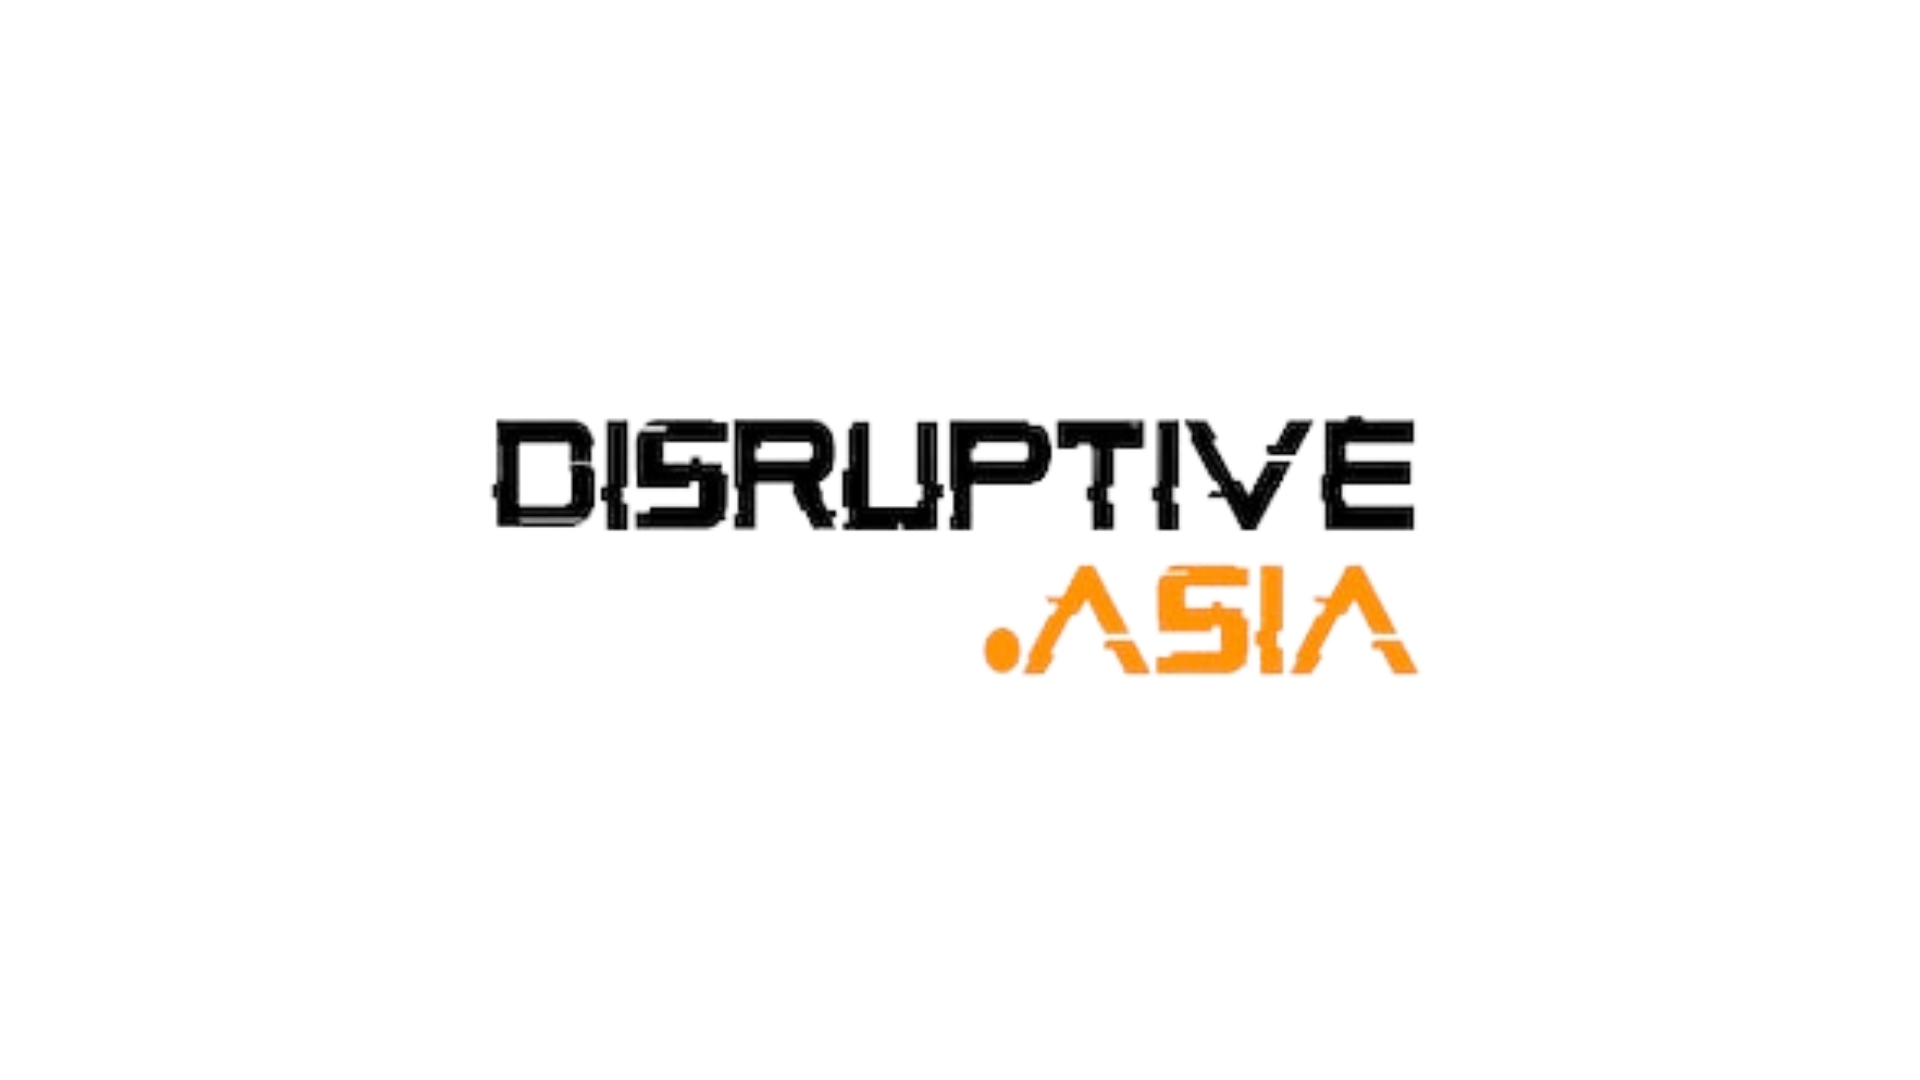 Disruptive.Asia: ICT and countries’ misguided trend towards nationalism